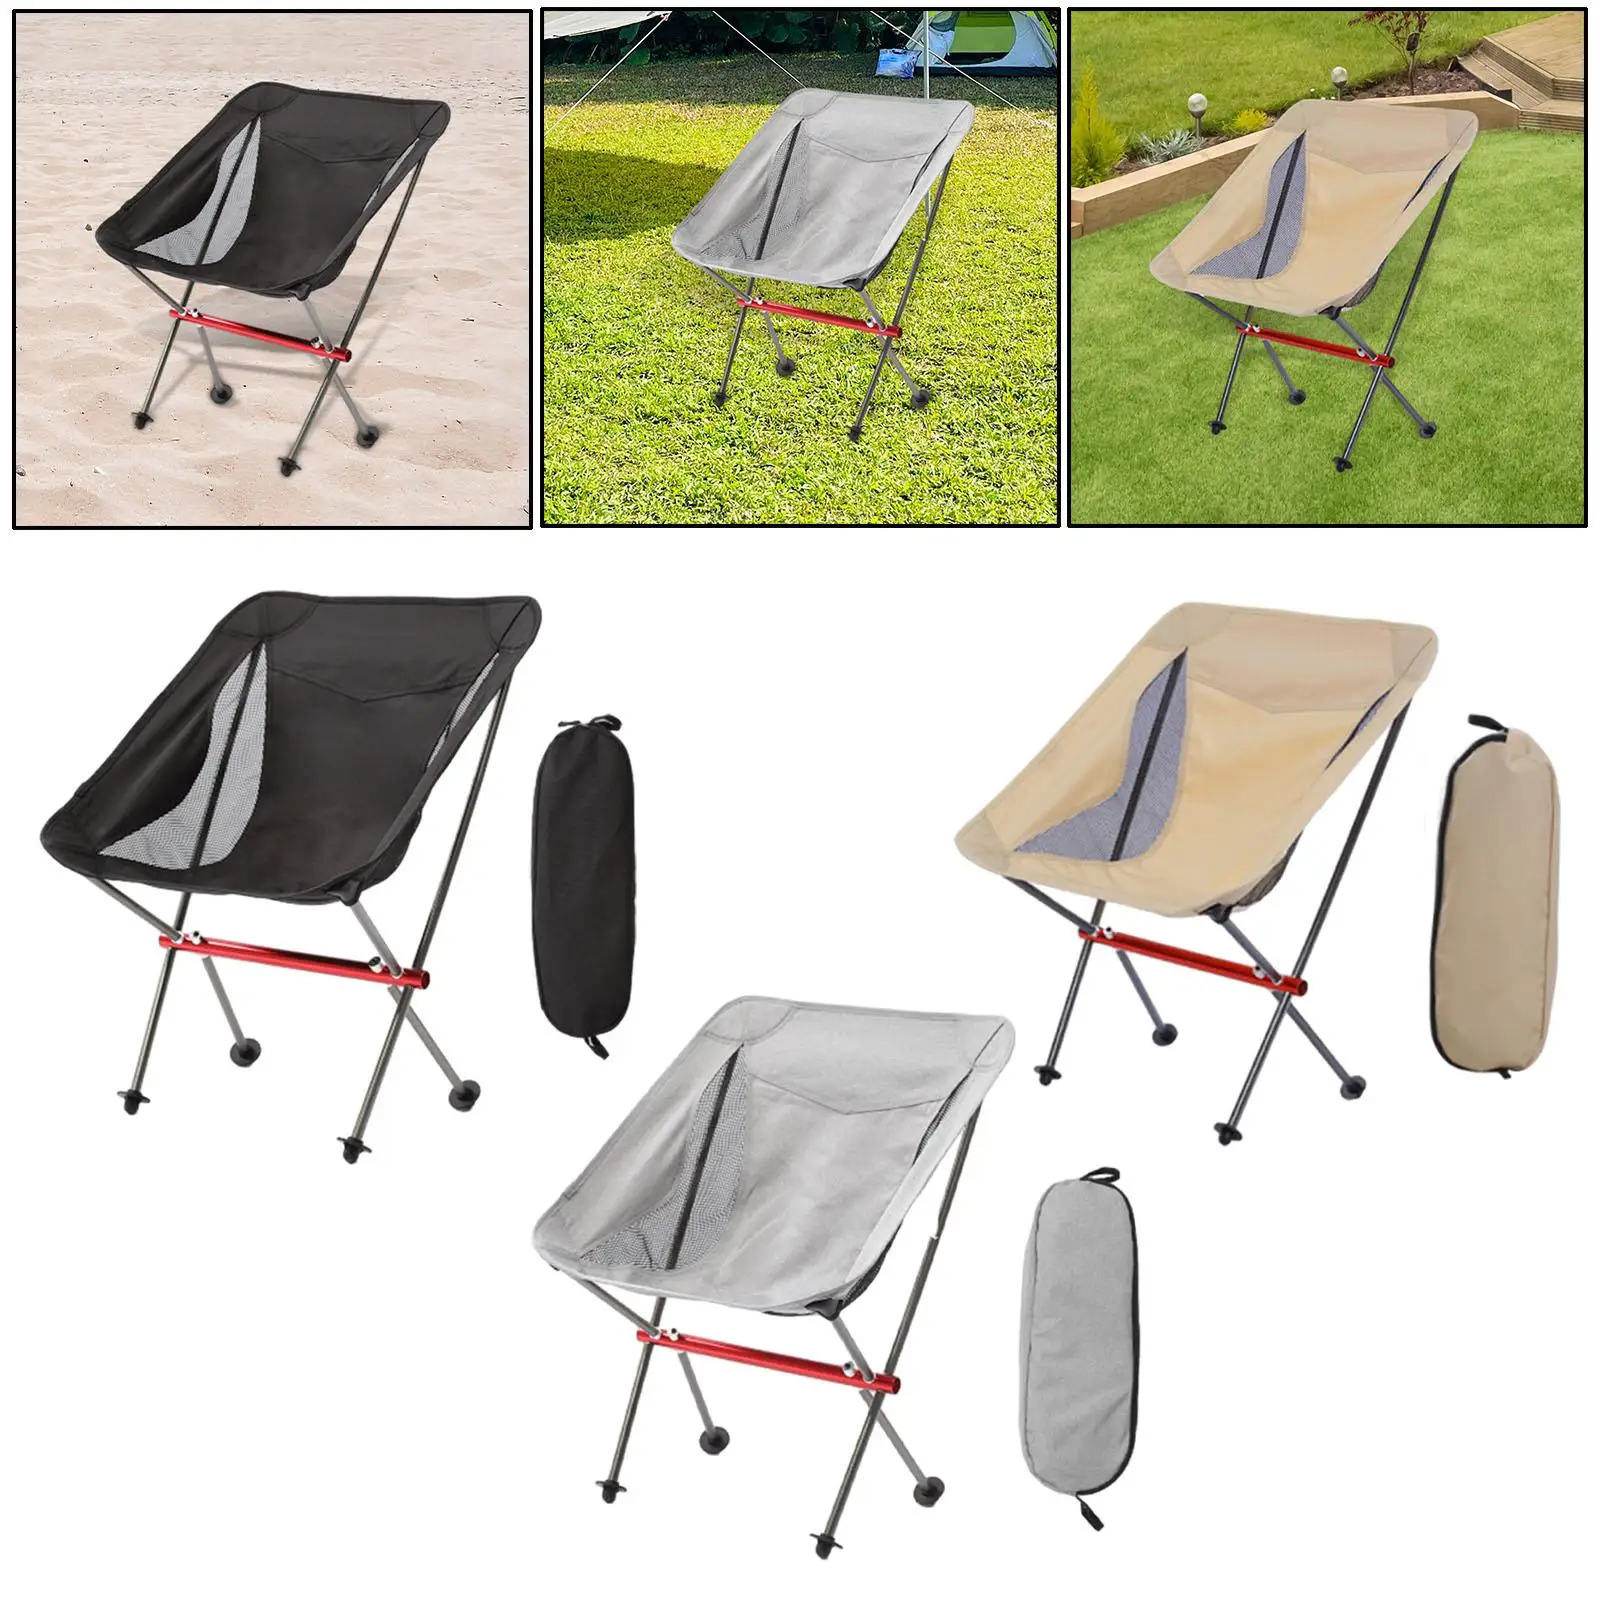 Folding Camping Chair Outdoor Moon Chair Lightweight Practical Folding Chair Beach Chair for Fishing Barbecue Backyard Hiking